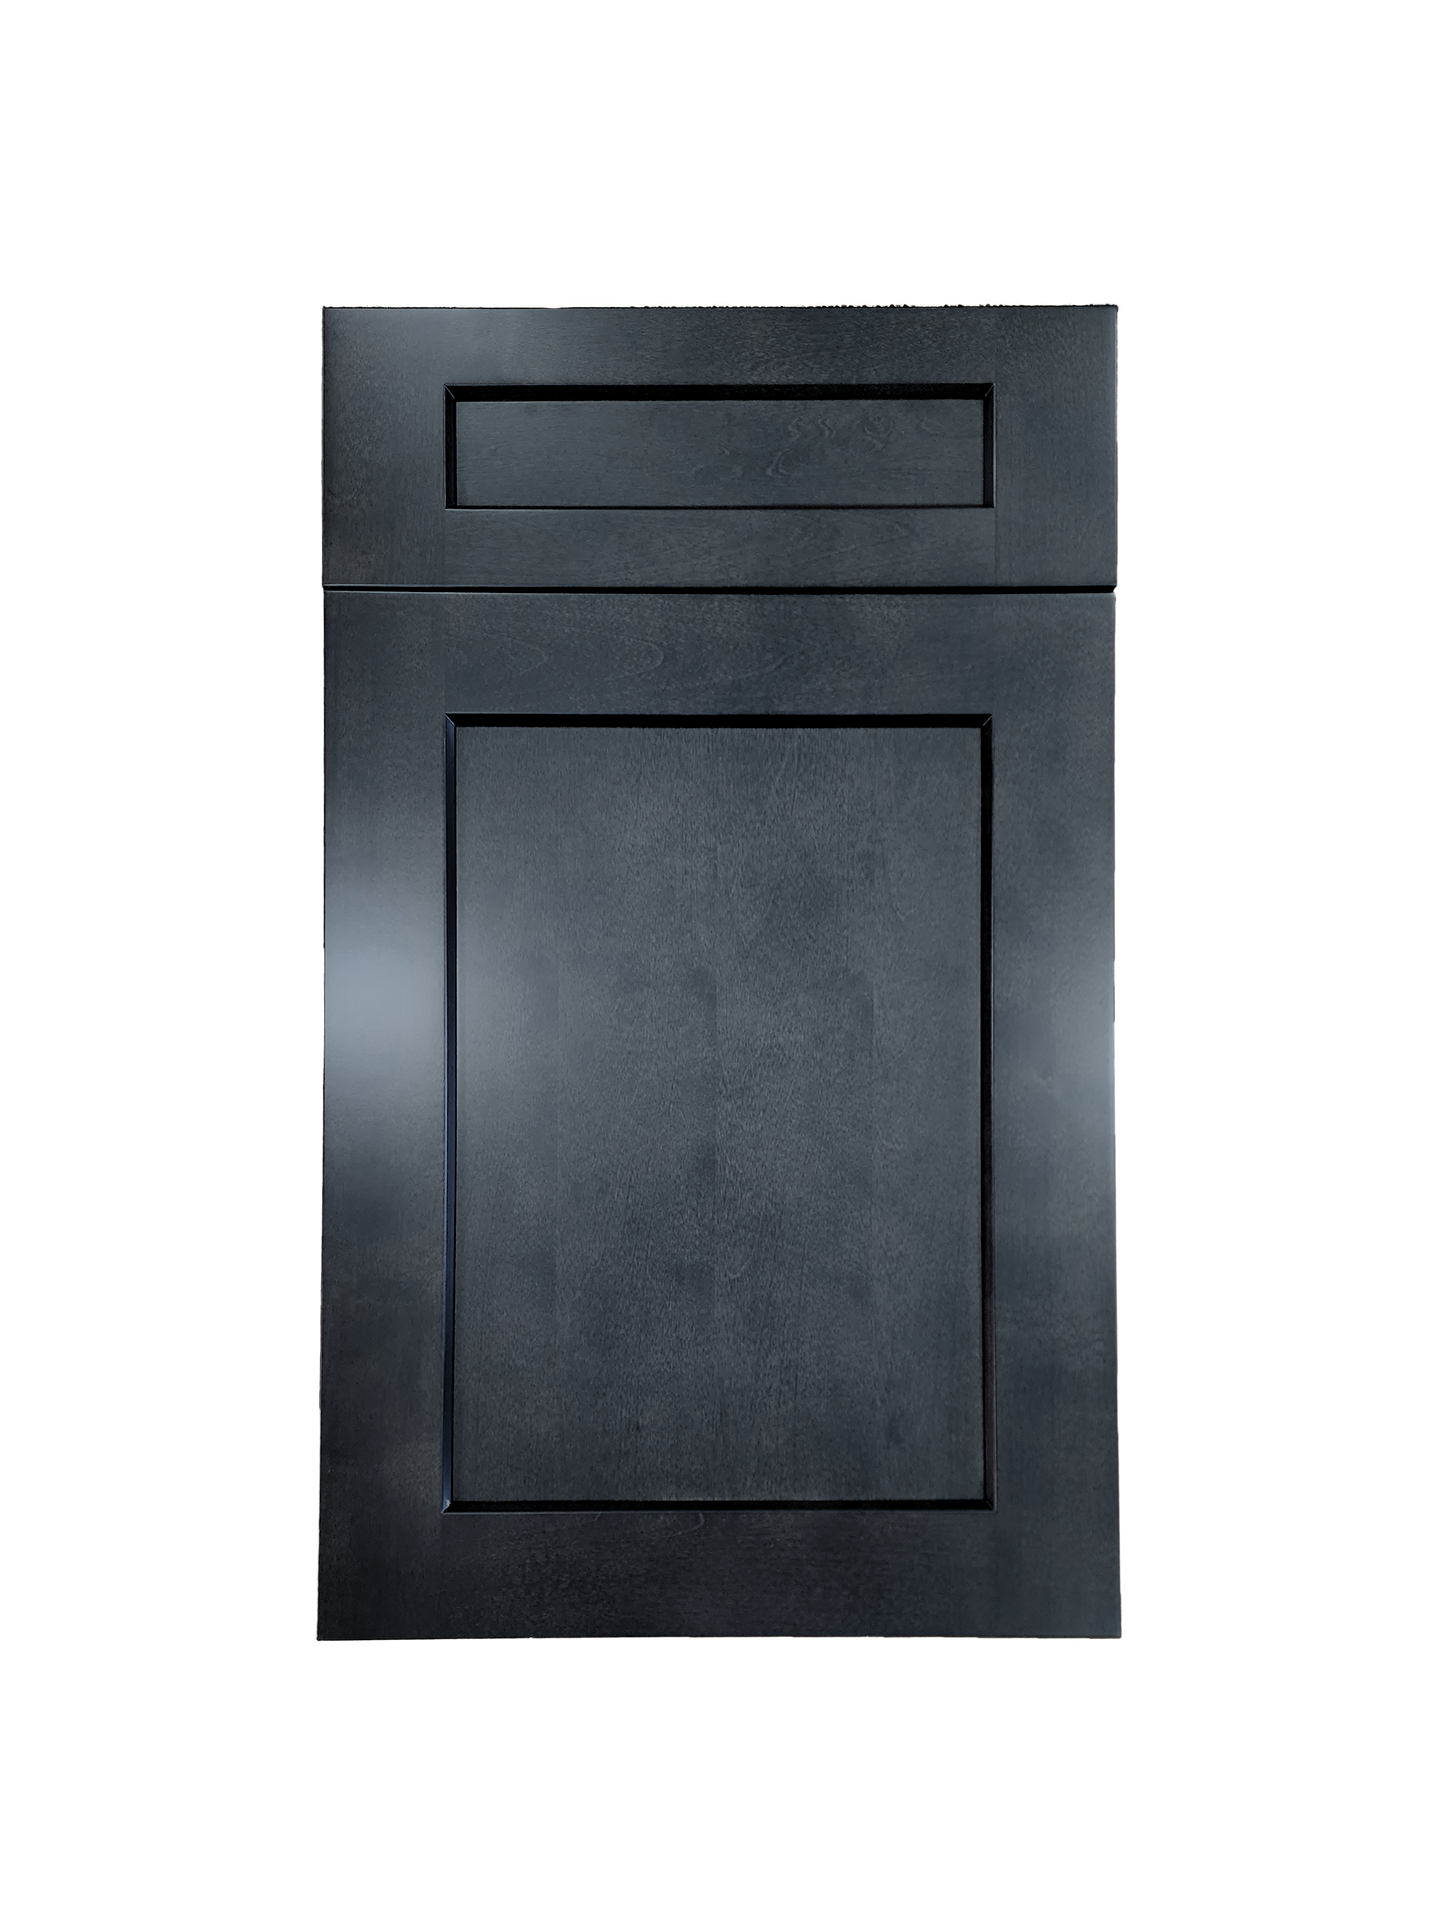 Stormy Grey Wall Cabinet 30 inches wide 12 inches deep 18 inches tall with Stormy Grey box and Stormy Grey doors